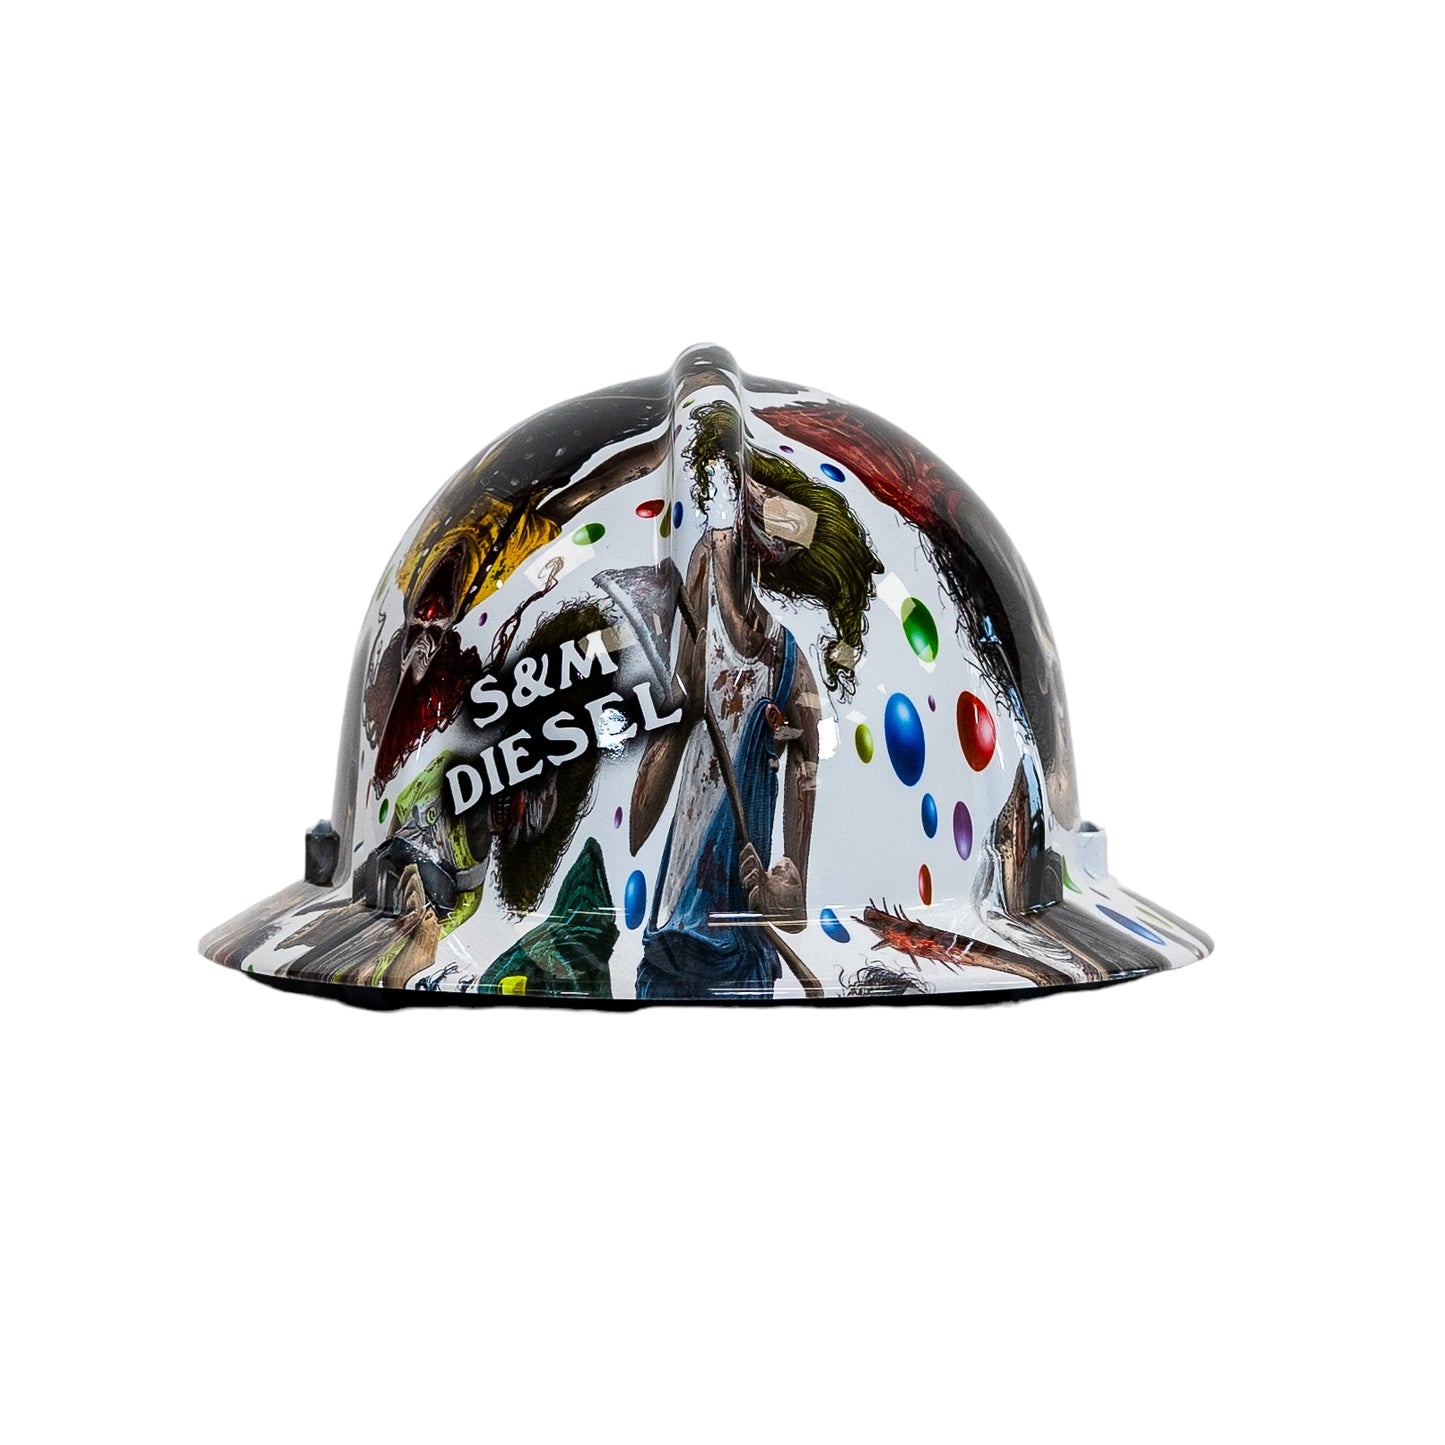 Custom hydro dipped hard hat- 7 color options/styles avail